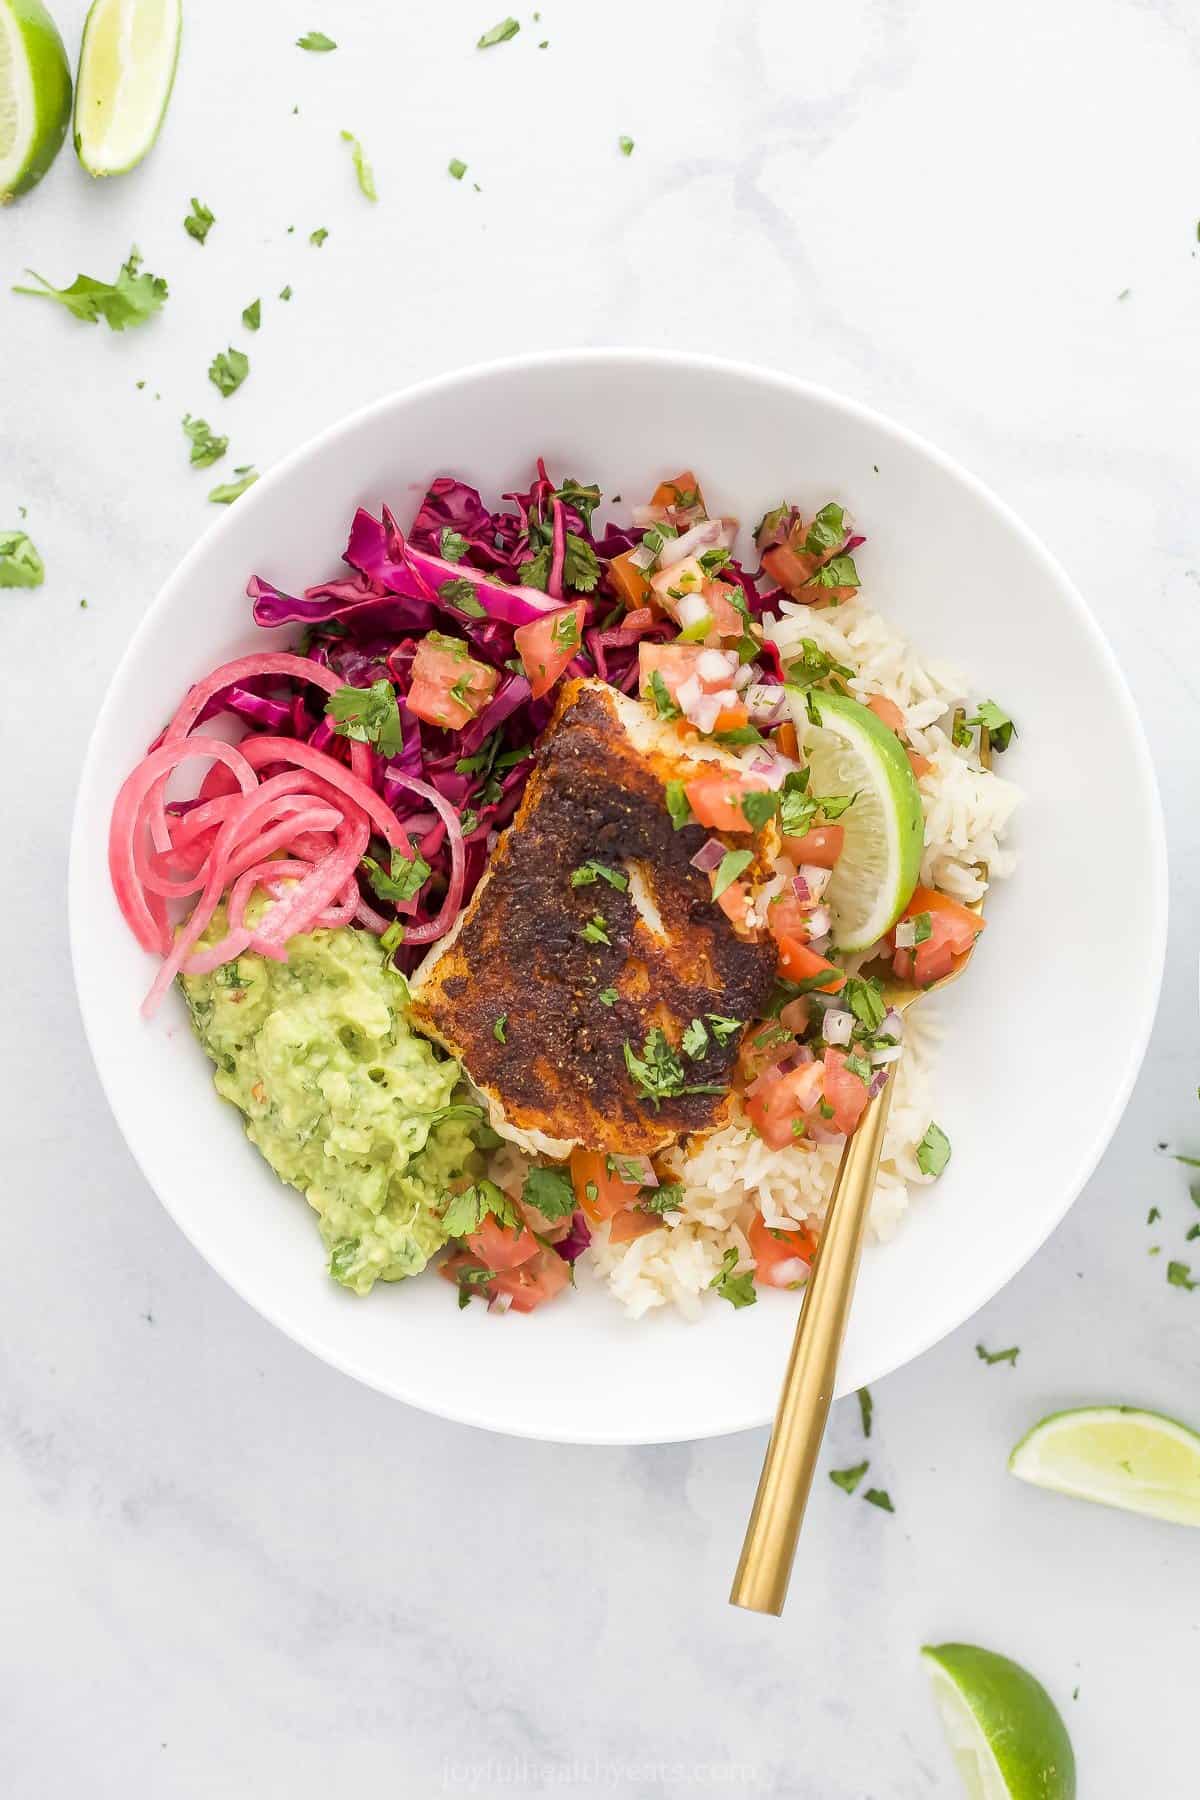 The bird's-eye view of a fish taco rice bowl on a marble surface beside four lime wedges